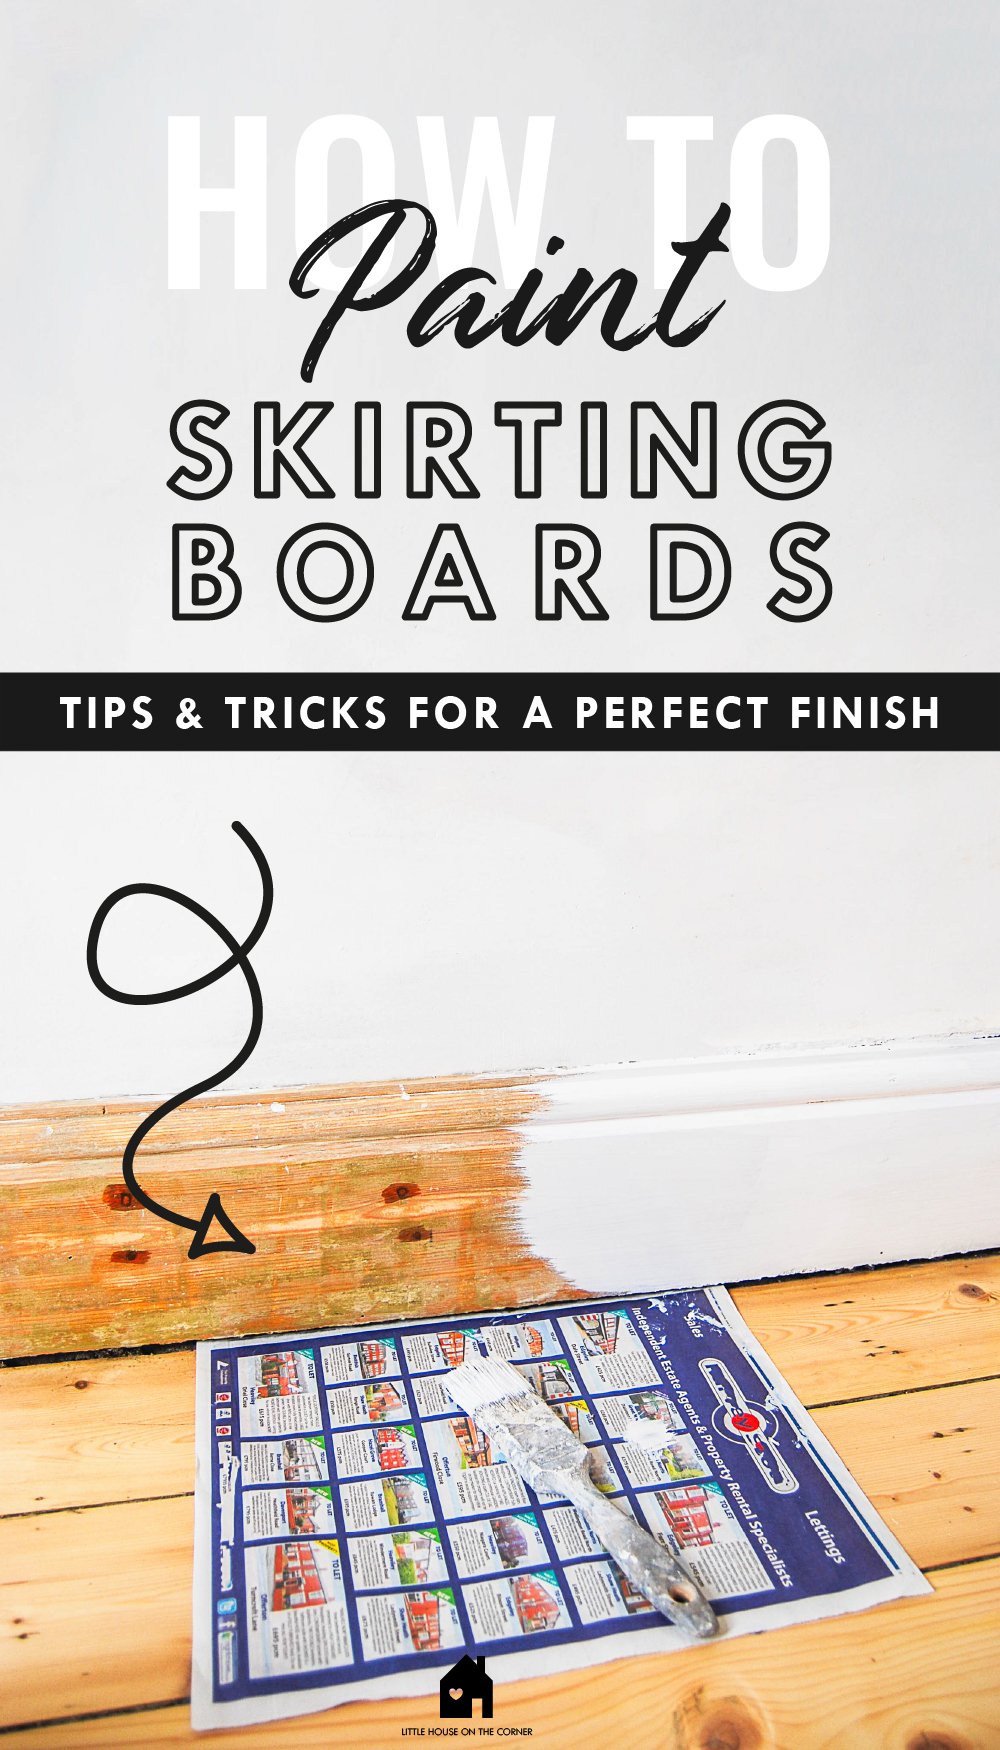 How to Fit Skirting Boards (Step-by-Step Guide) | John Lewis Finance